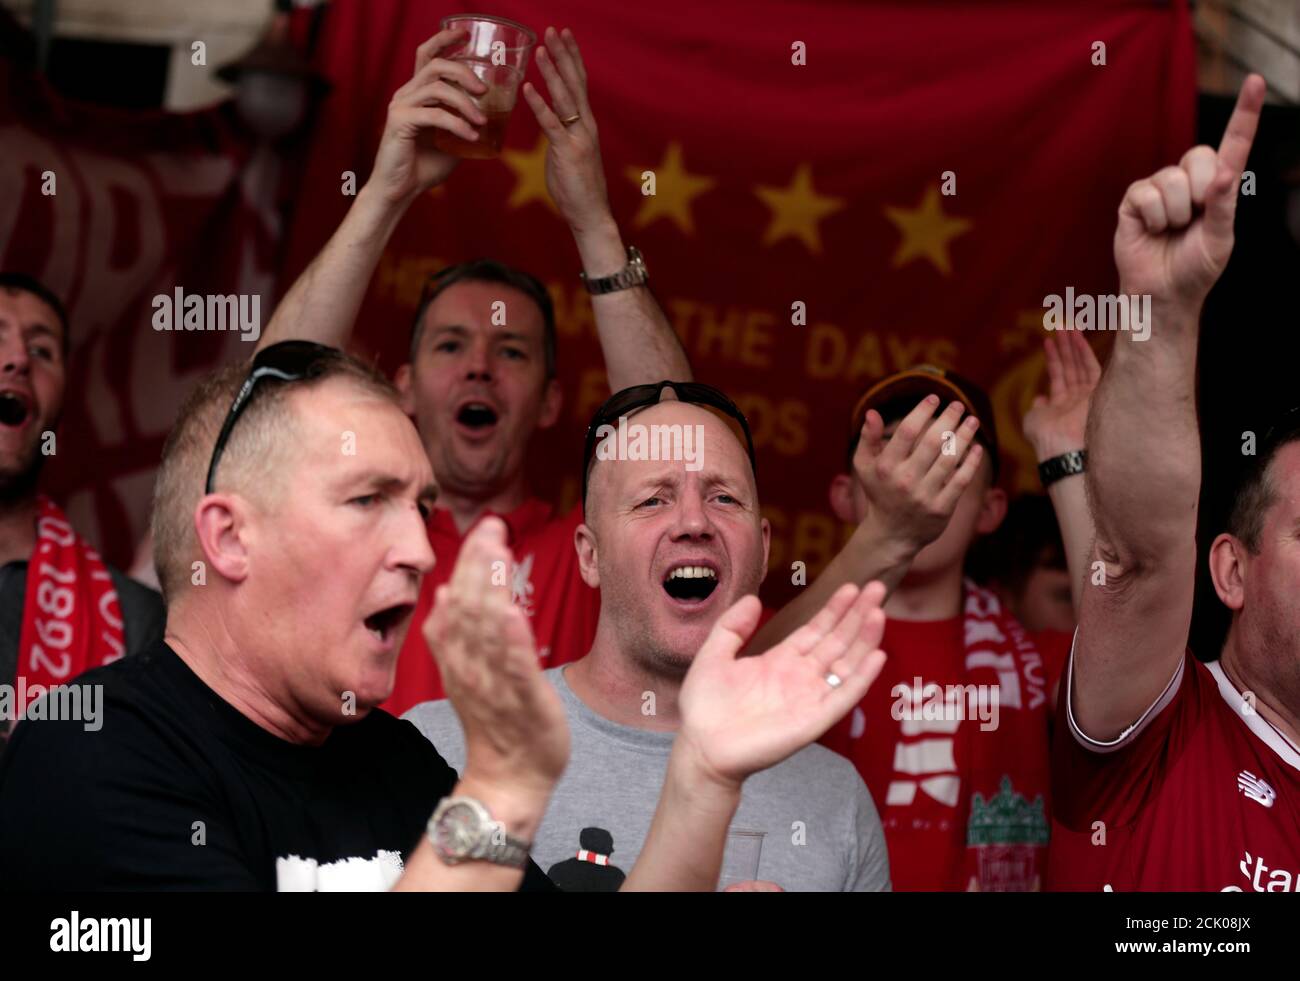 Liverpool supporters sing before the AS Roma vs Liverpool Champions League semi-final soccer match in Rome, Italy May 2, 2018. REUTERS/Yara Nardi Stock Photo